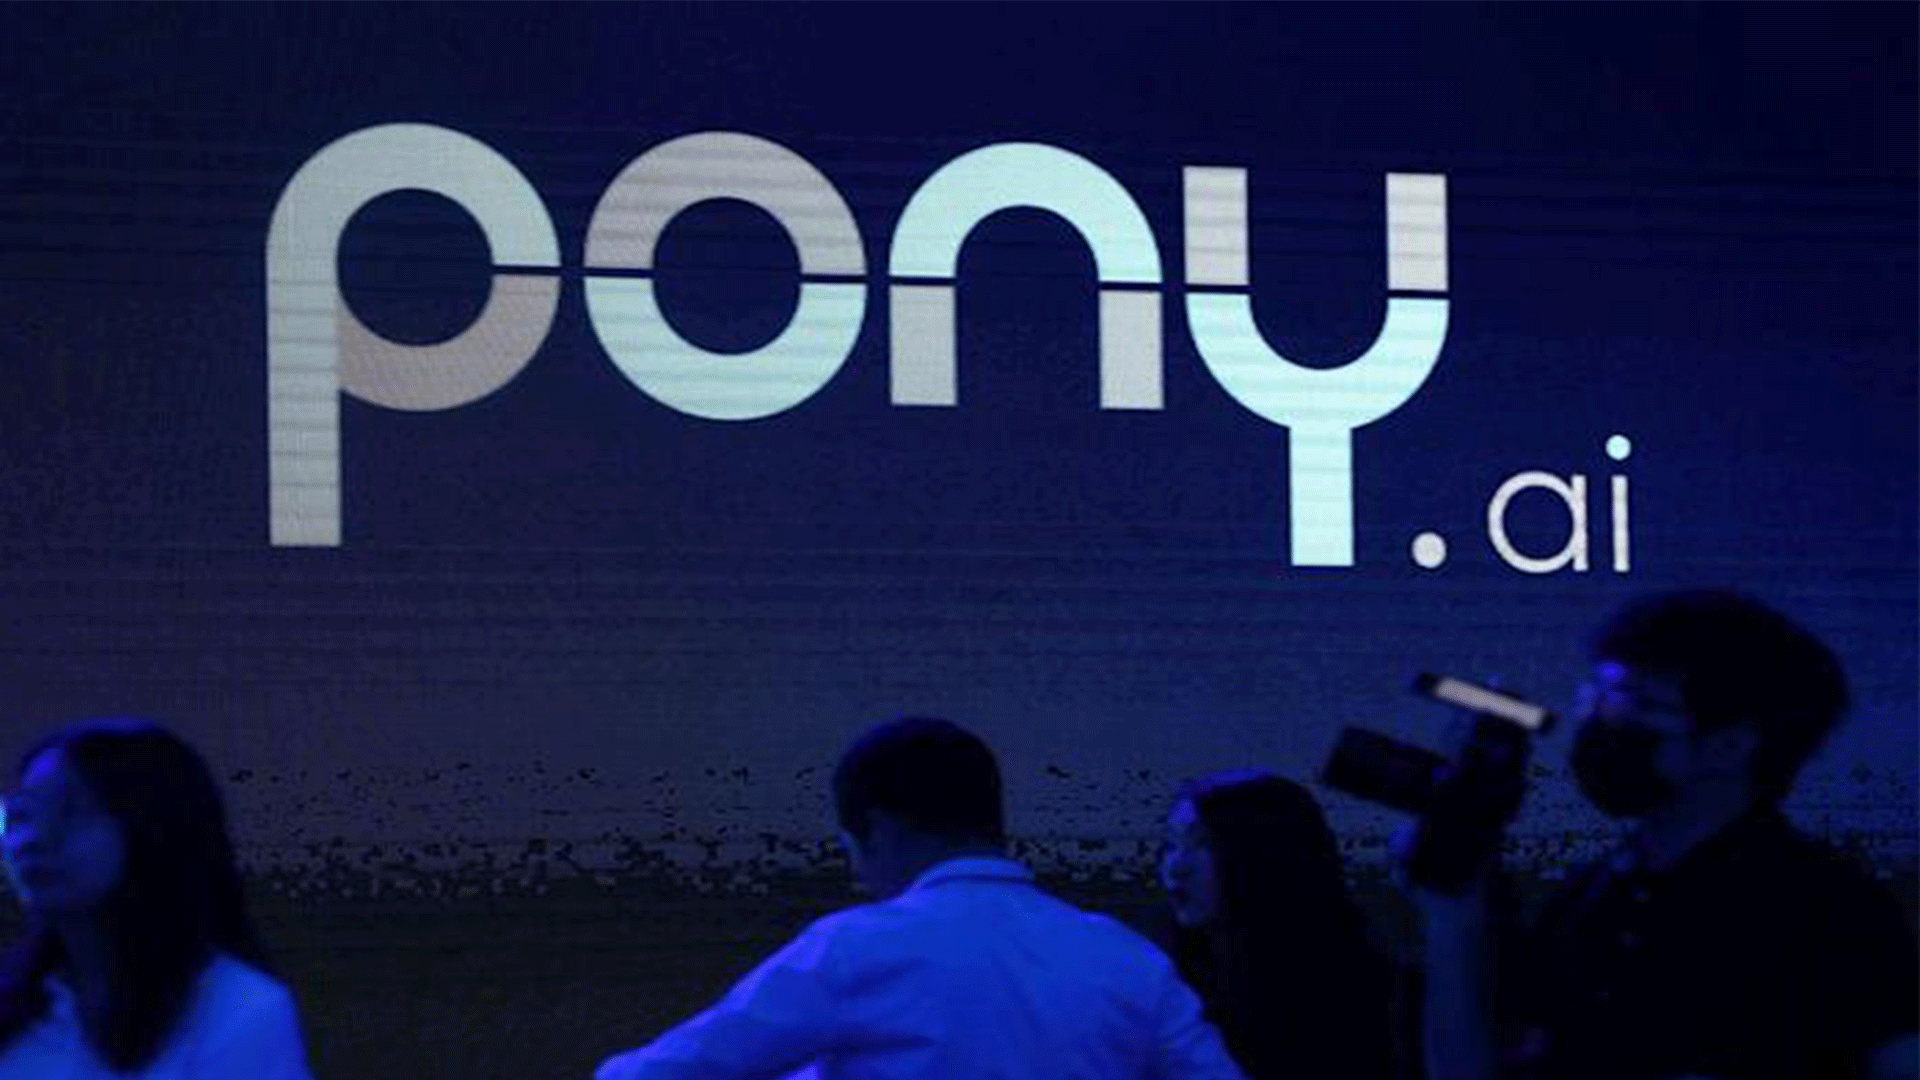  A logo of the autonomous driving technology startup Pony.ai is seen on a screen during an event in Beijing, China May 13, 2021. REUTERS/Tingshu Wang